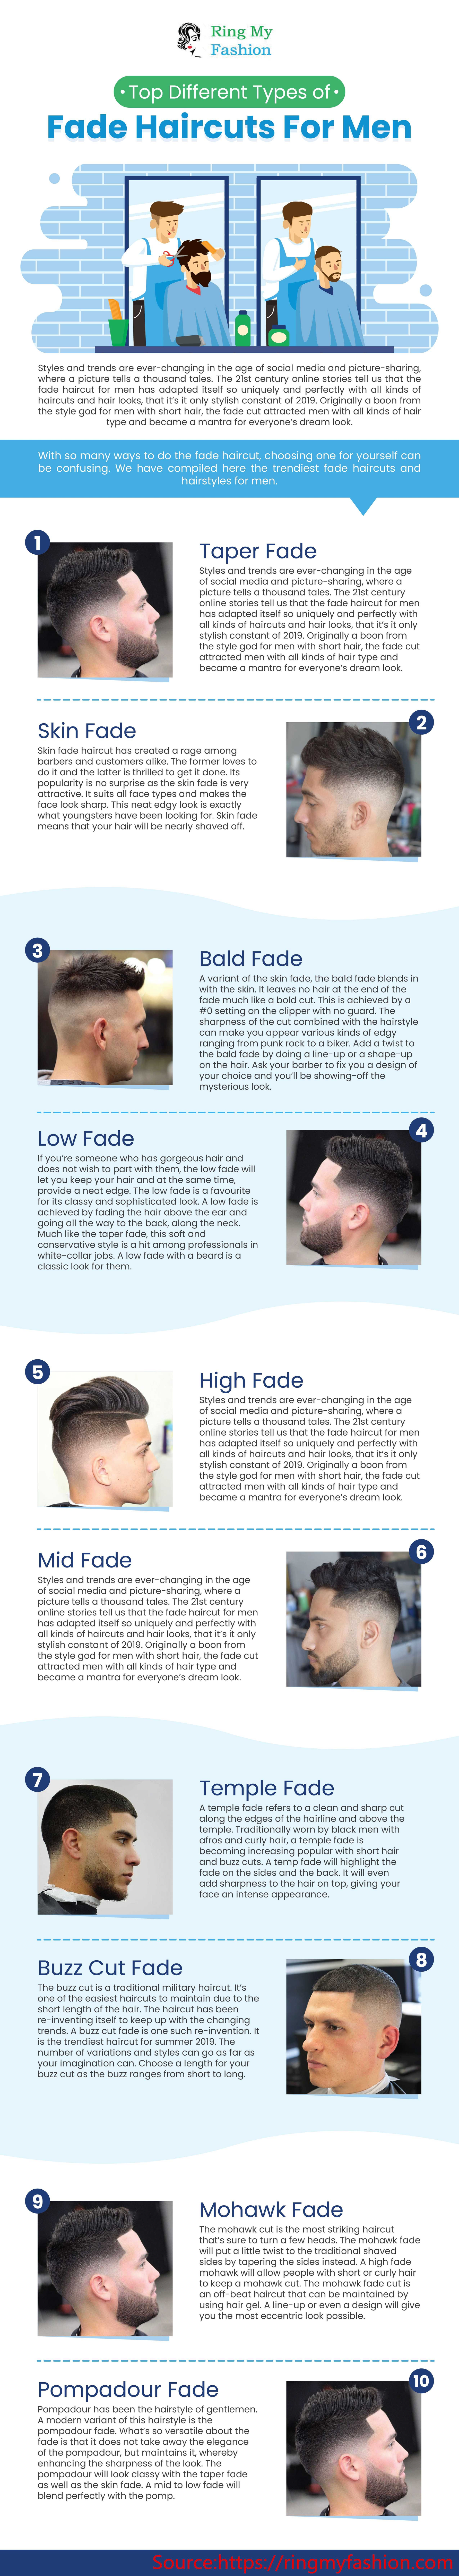 Top 10 Different Types Of Fade Haircuts For Men